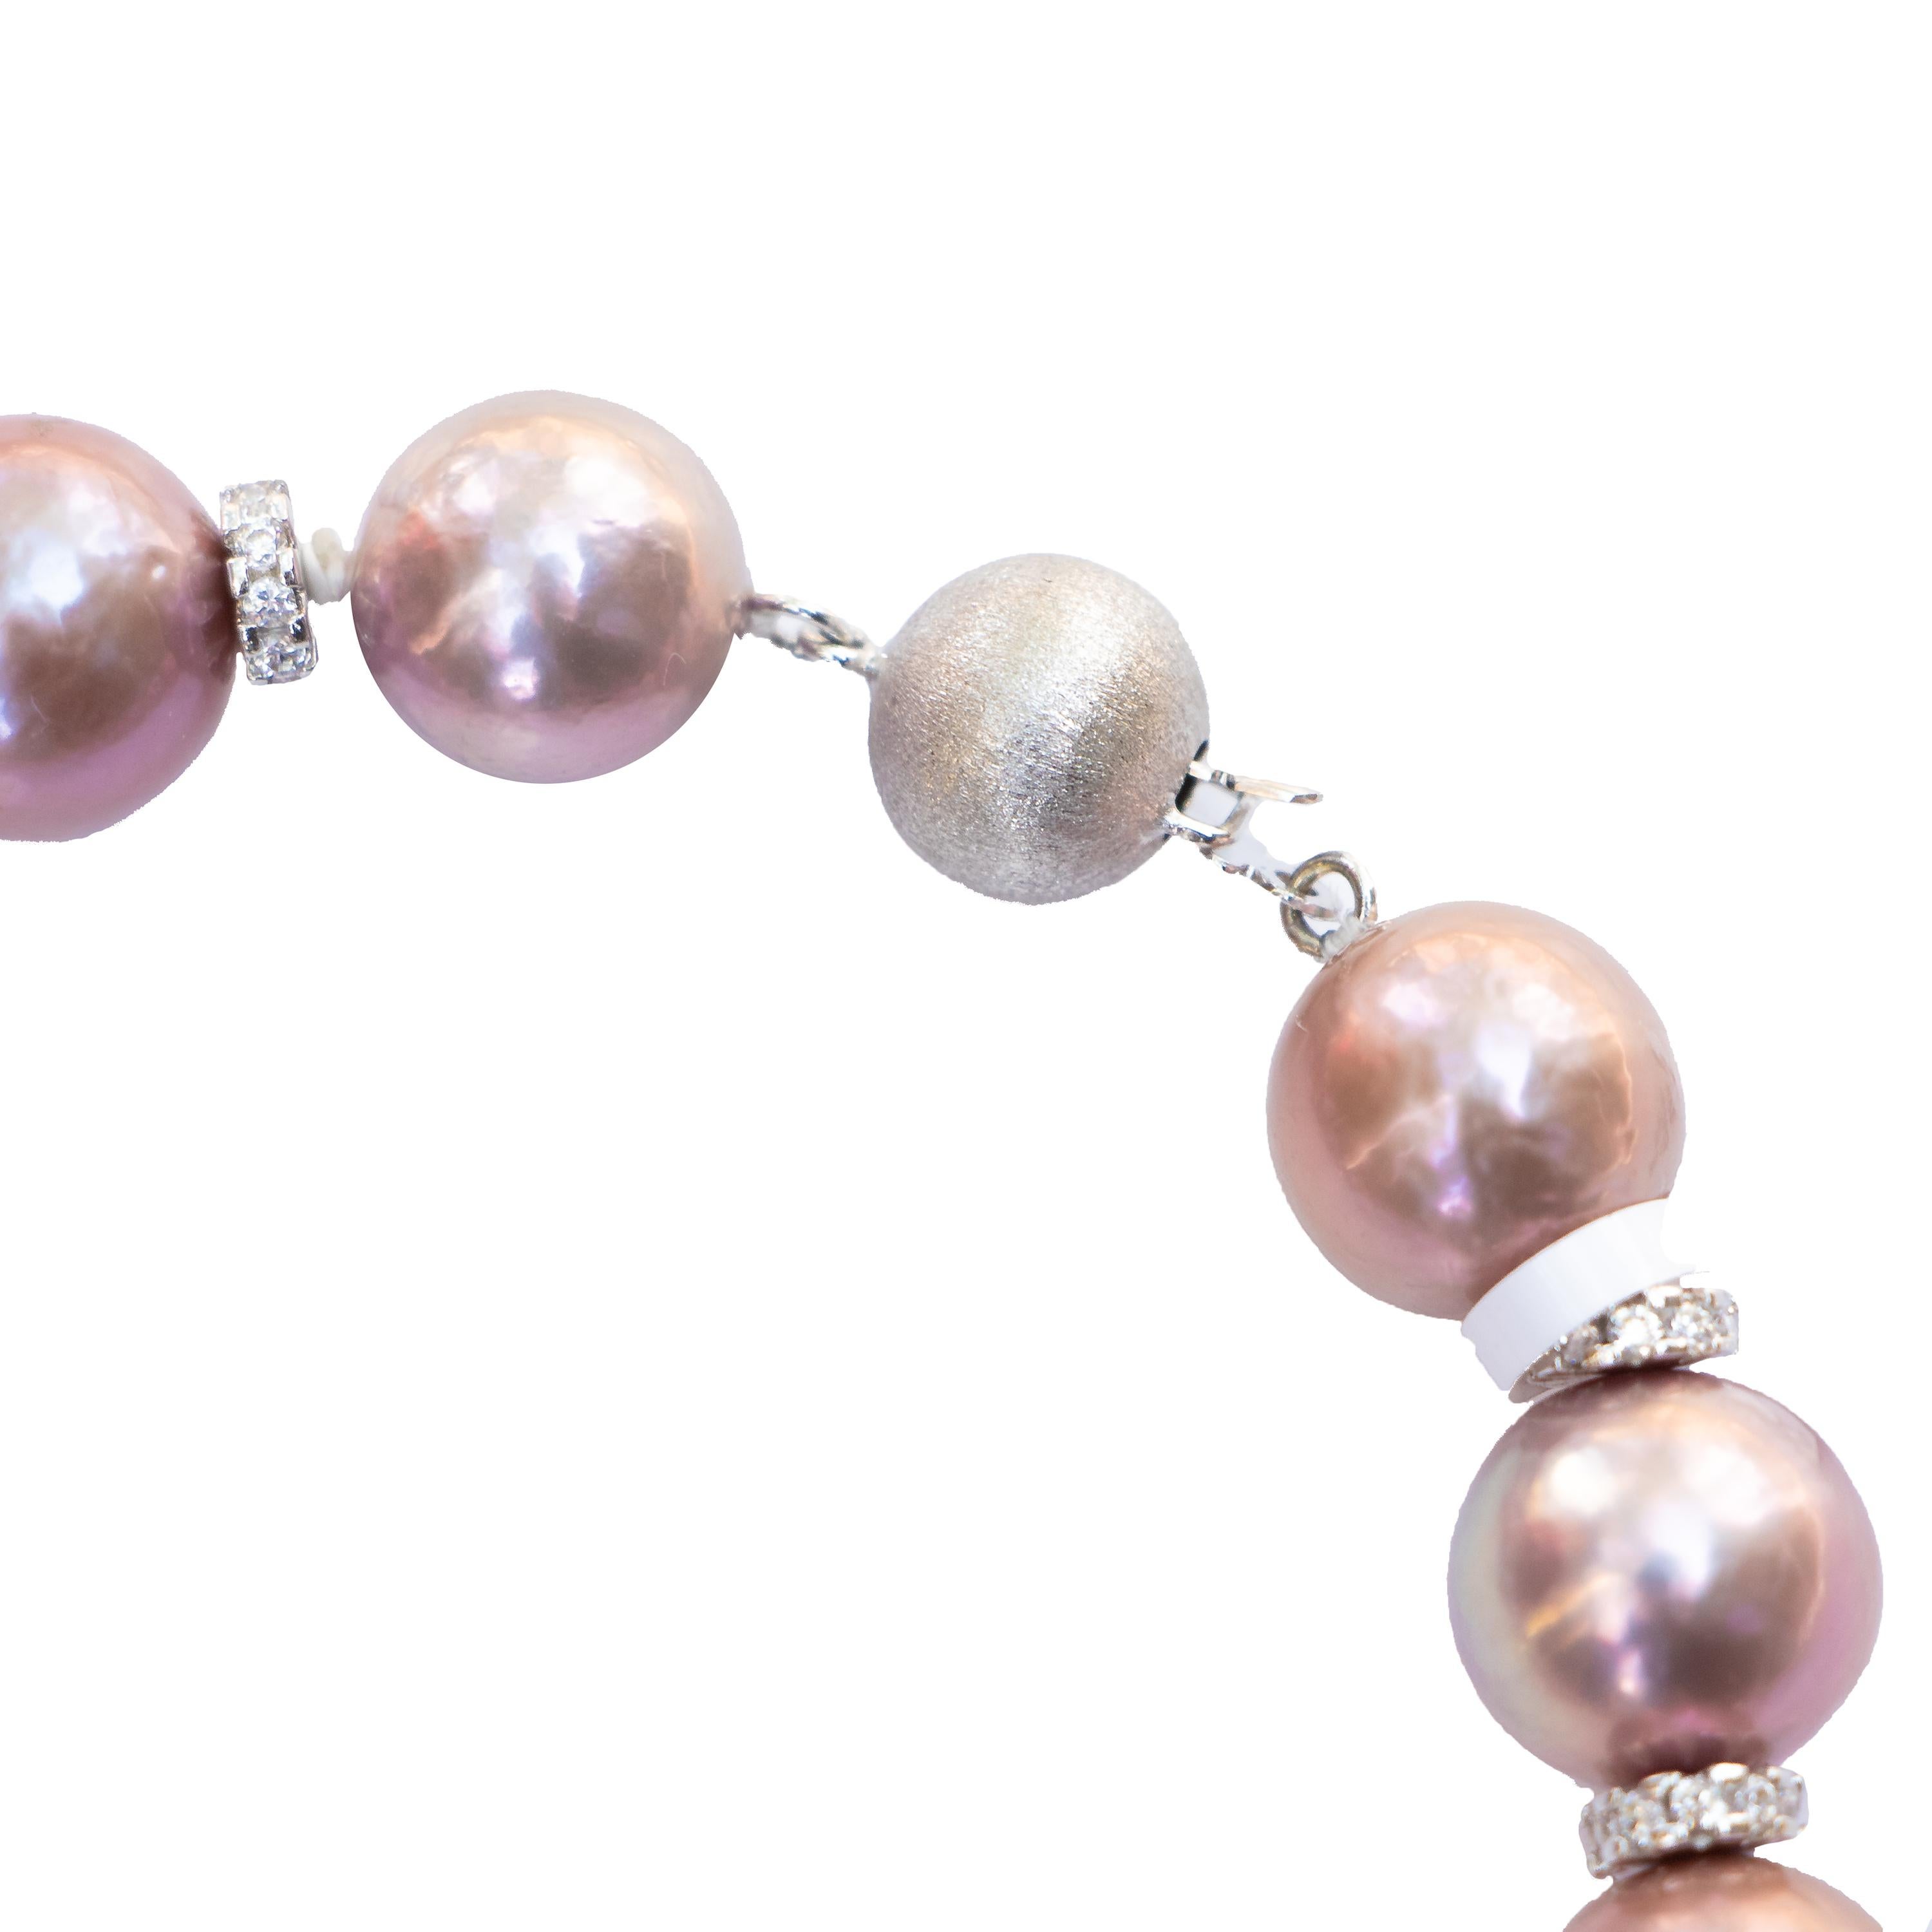 kasumiga pearls necklace for sale